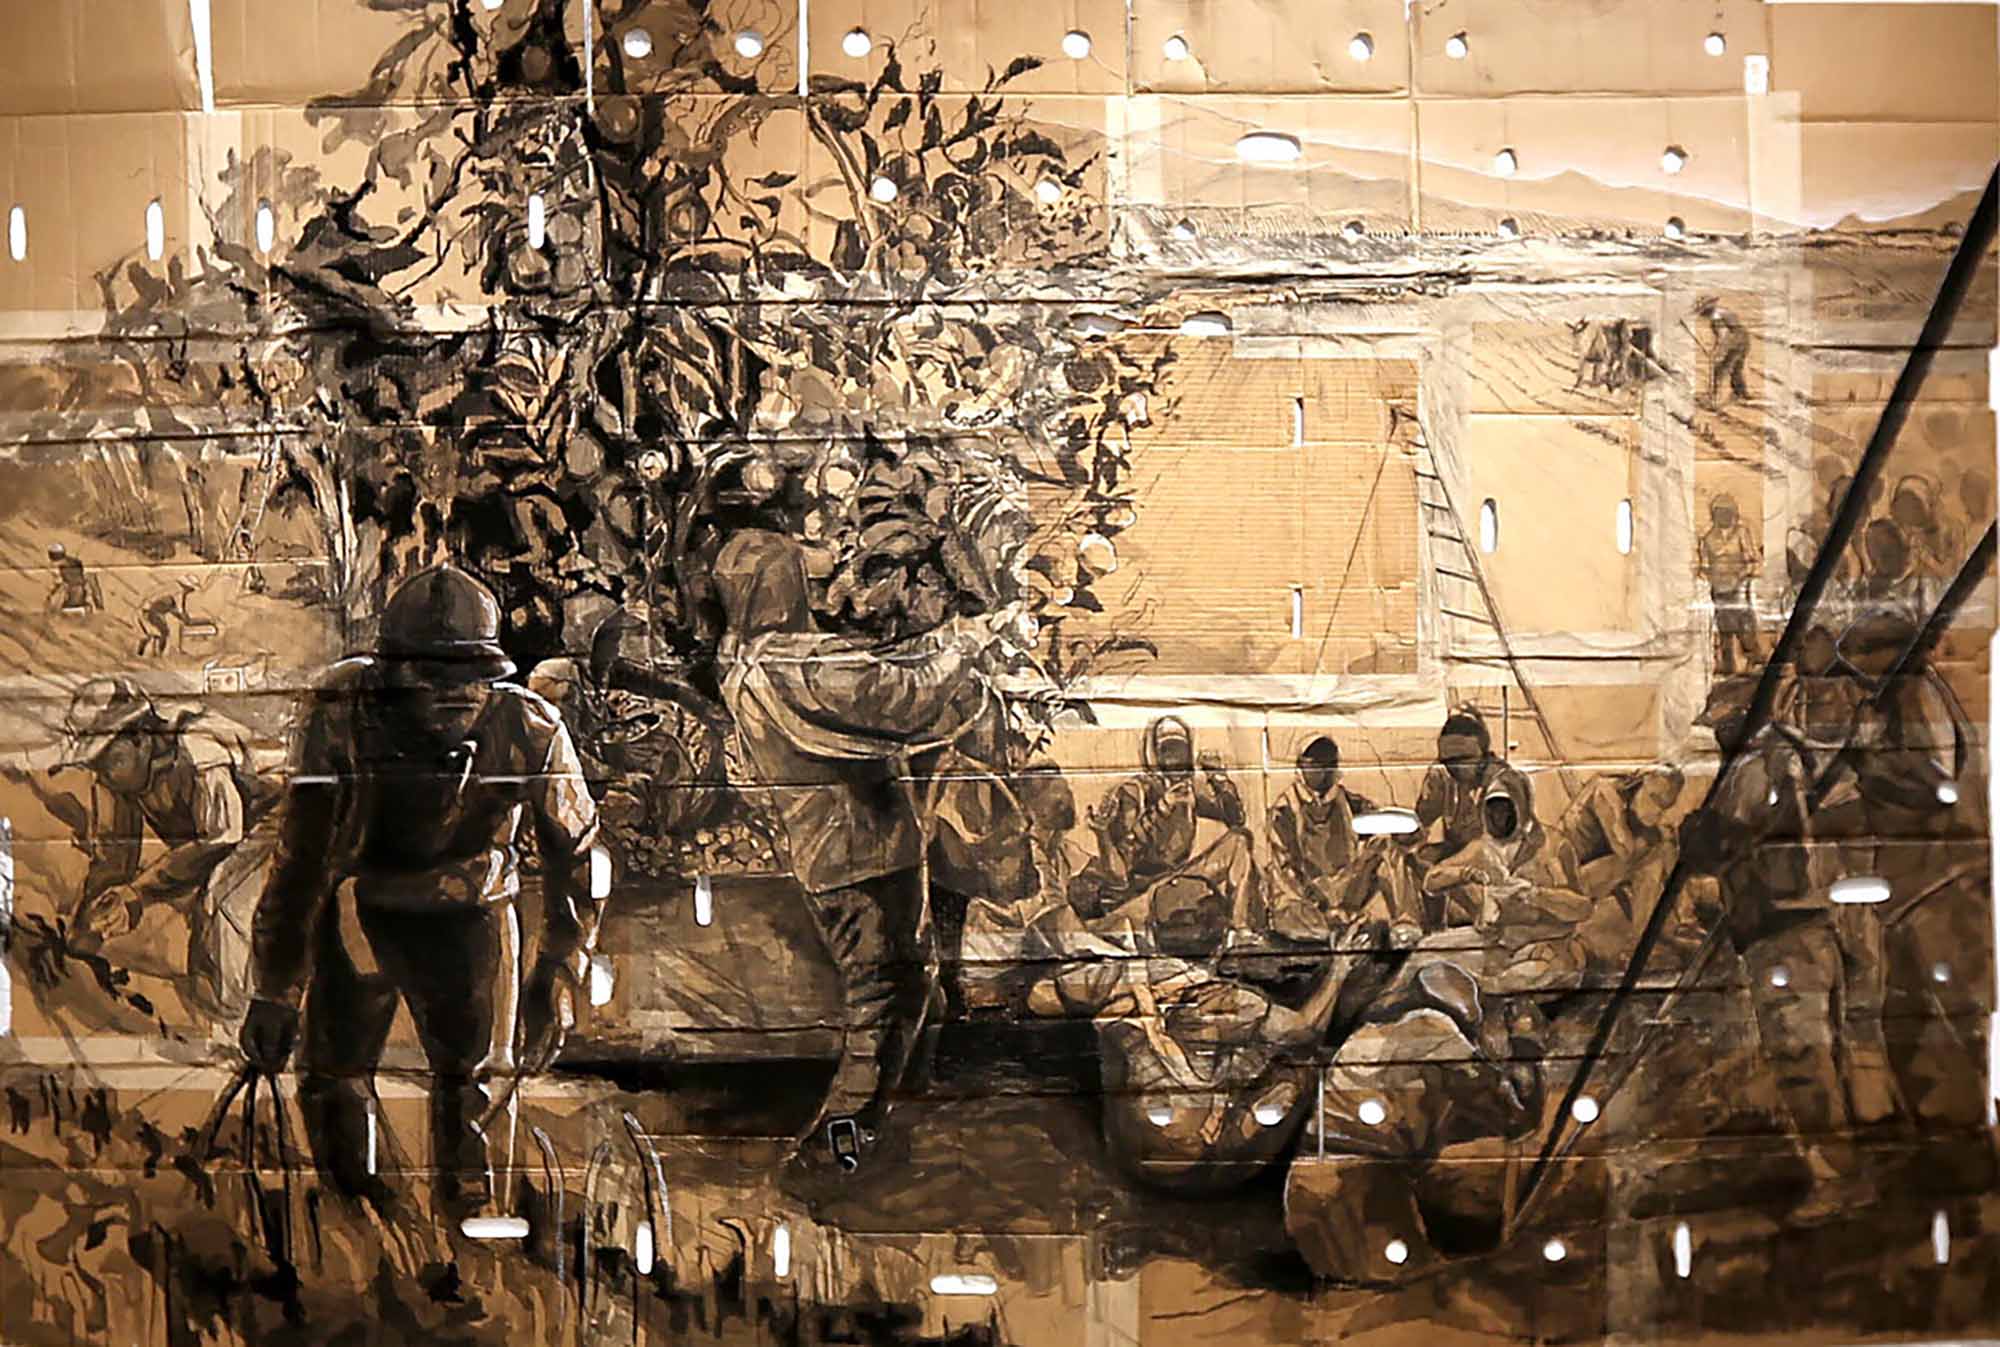 Philosophy in the Fields
2016
Ink and Charcoal on Unfolded Produce Cardboard Boxes
72 x 108 Inches